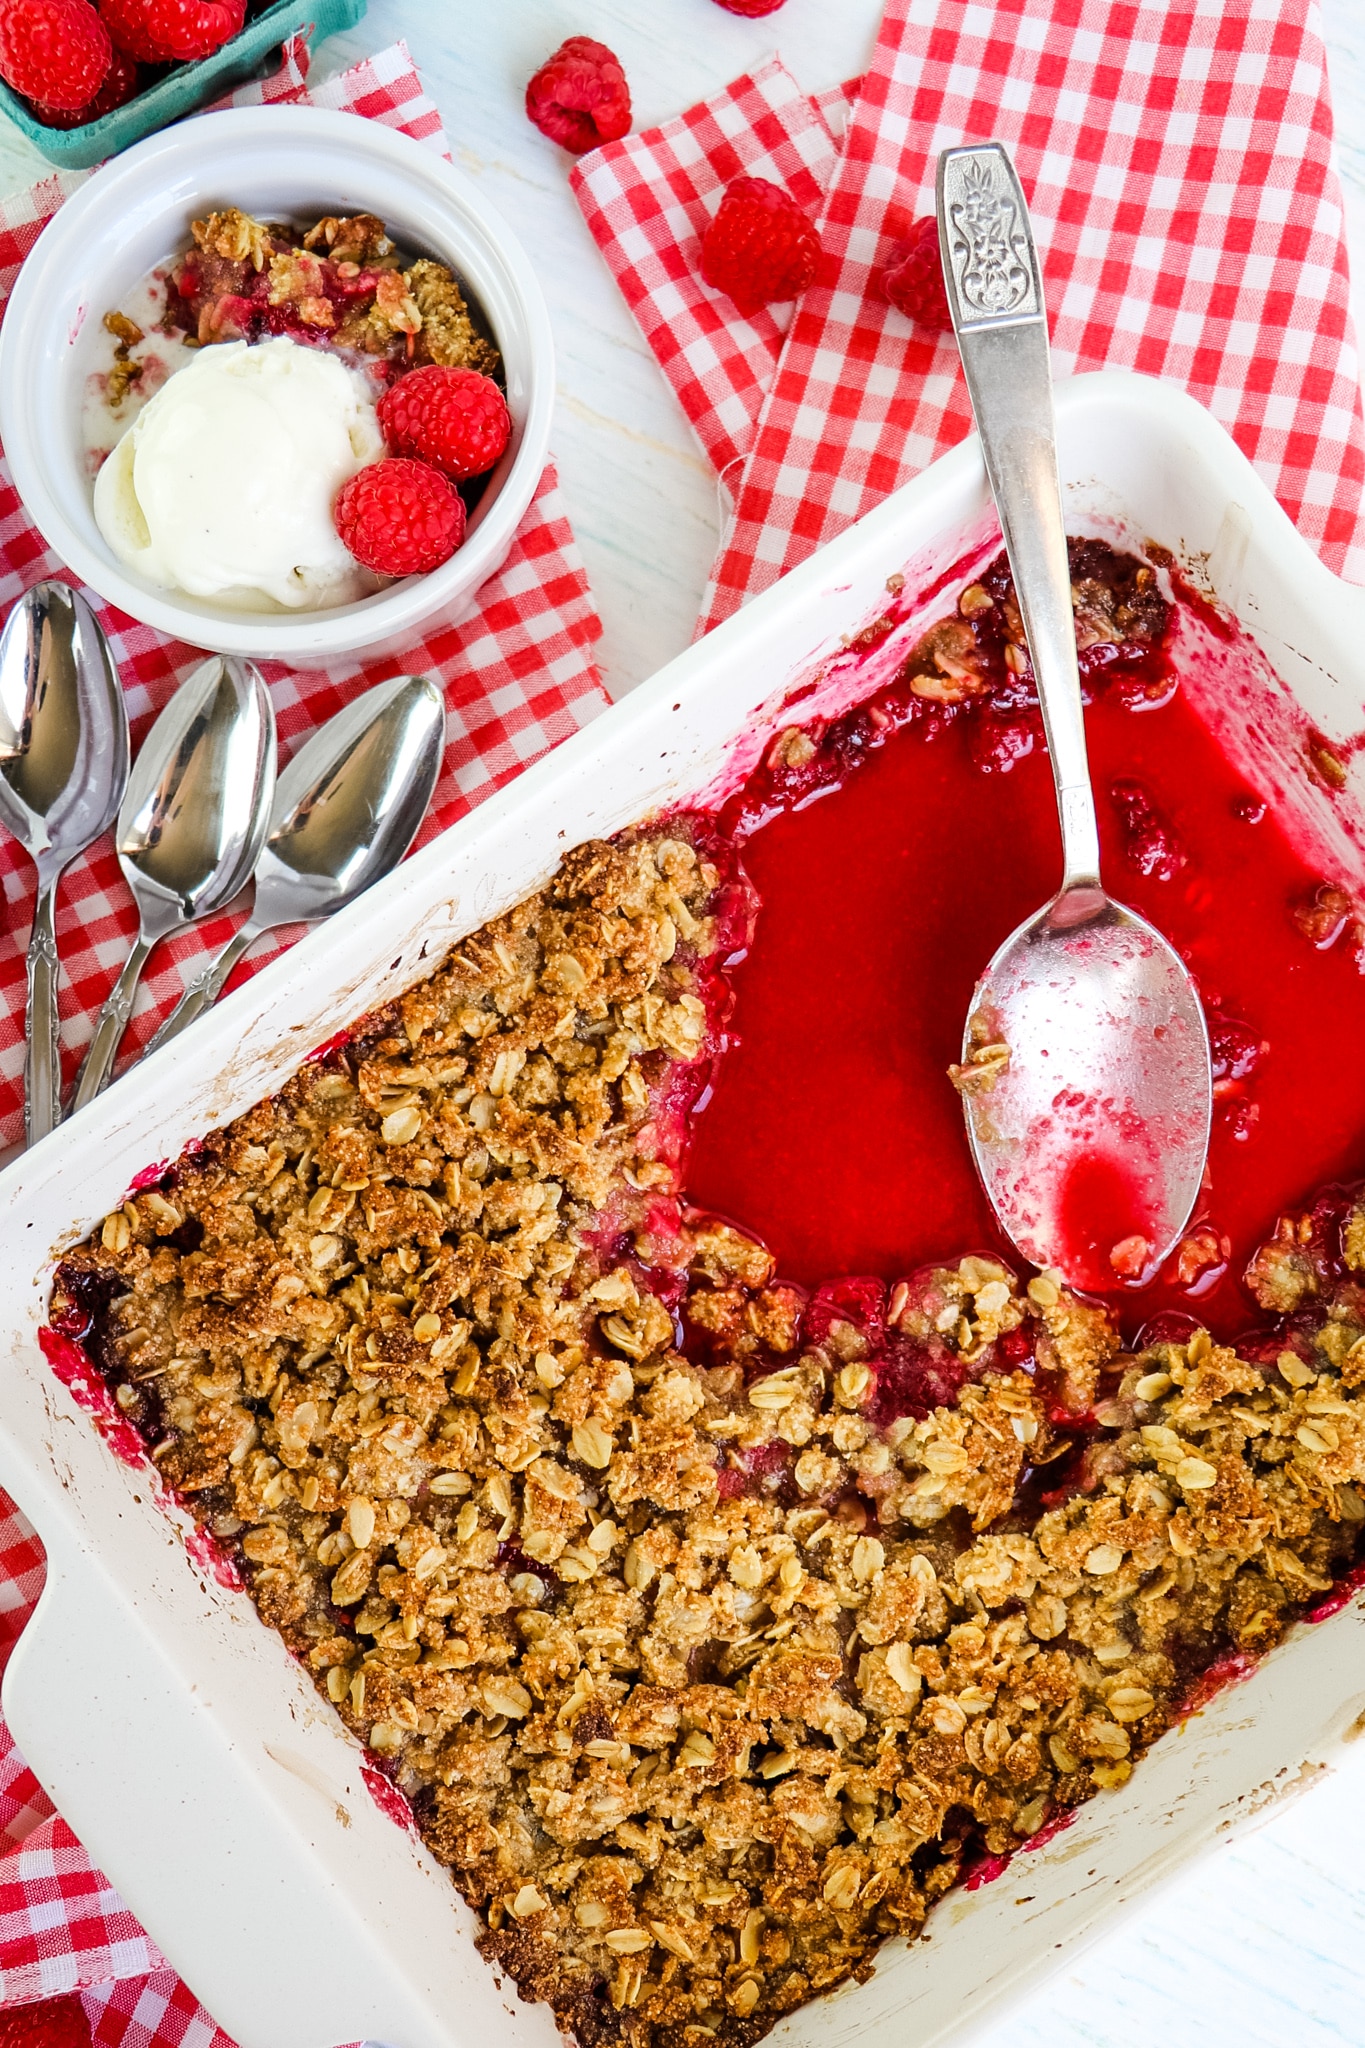 Raspberry crumble spooned out of dish, with bowl of crumble and ice cream on the side.